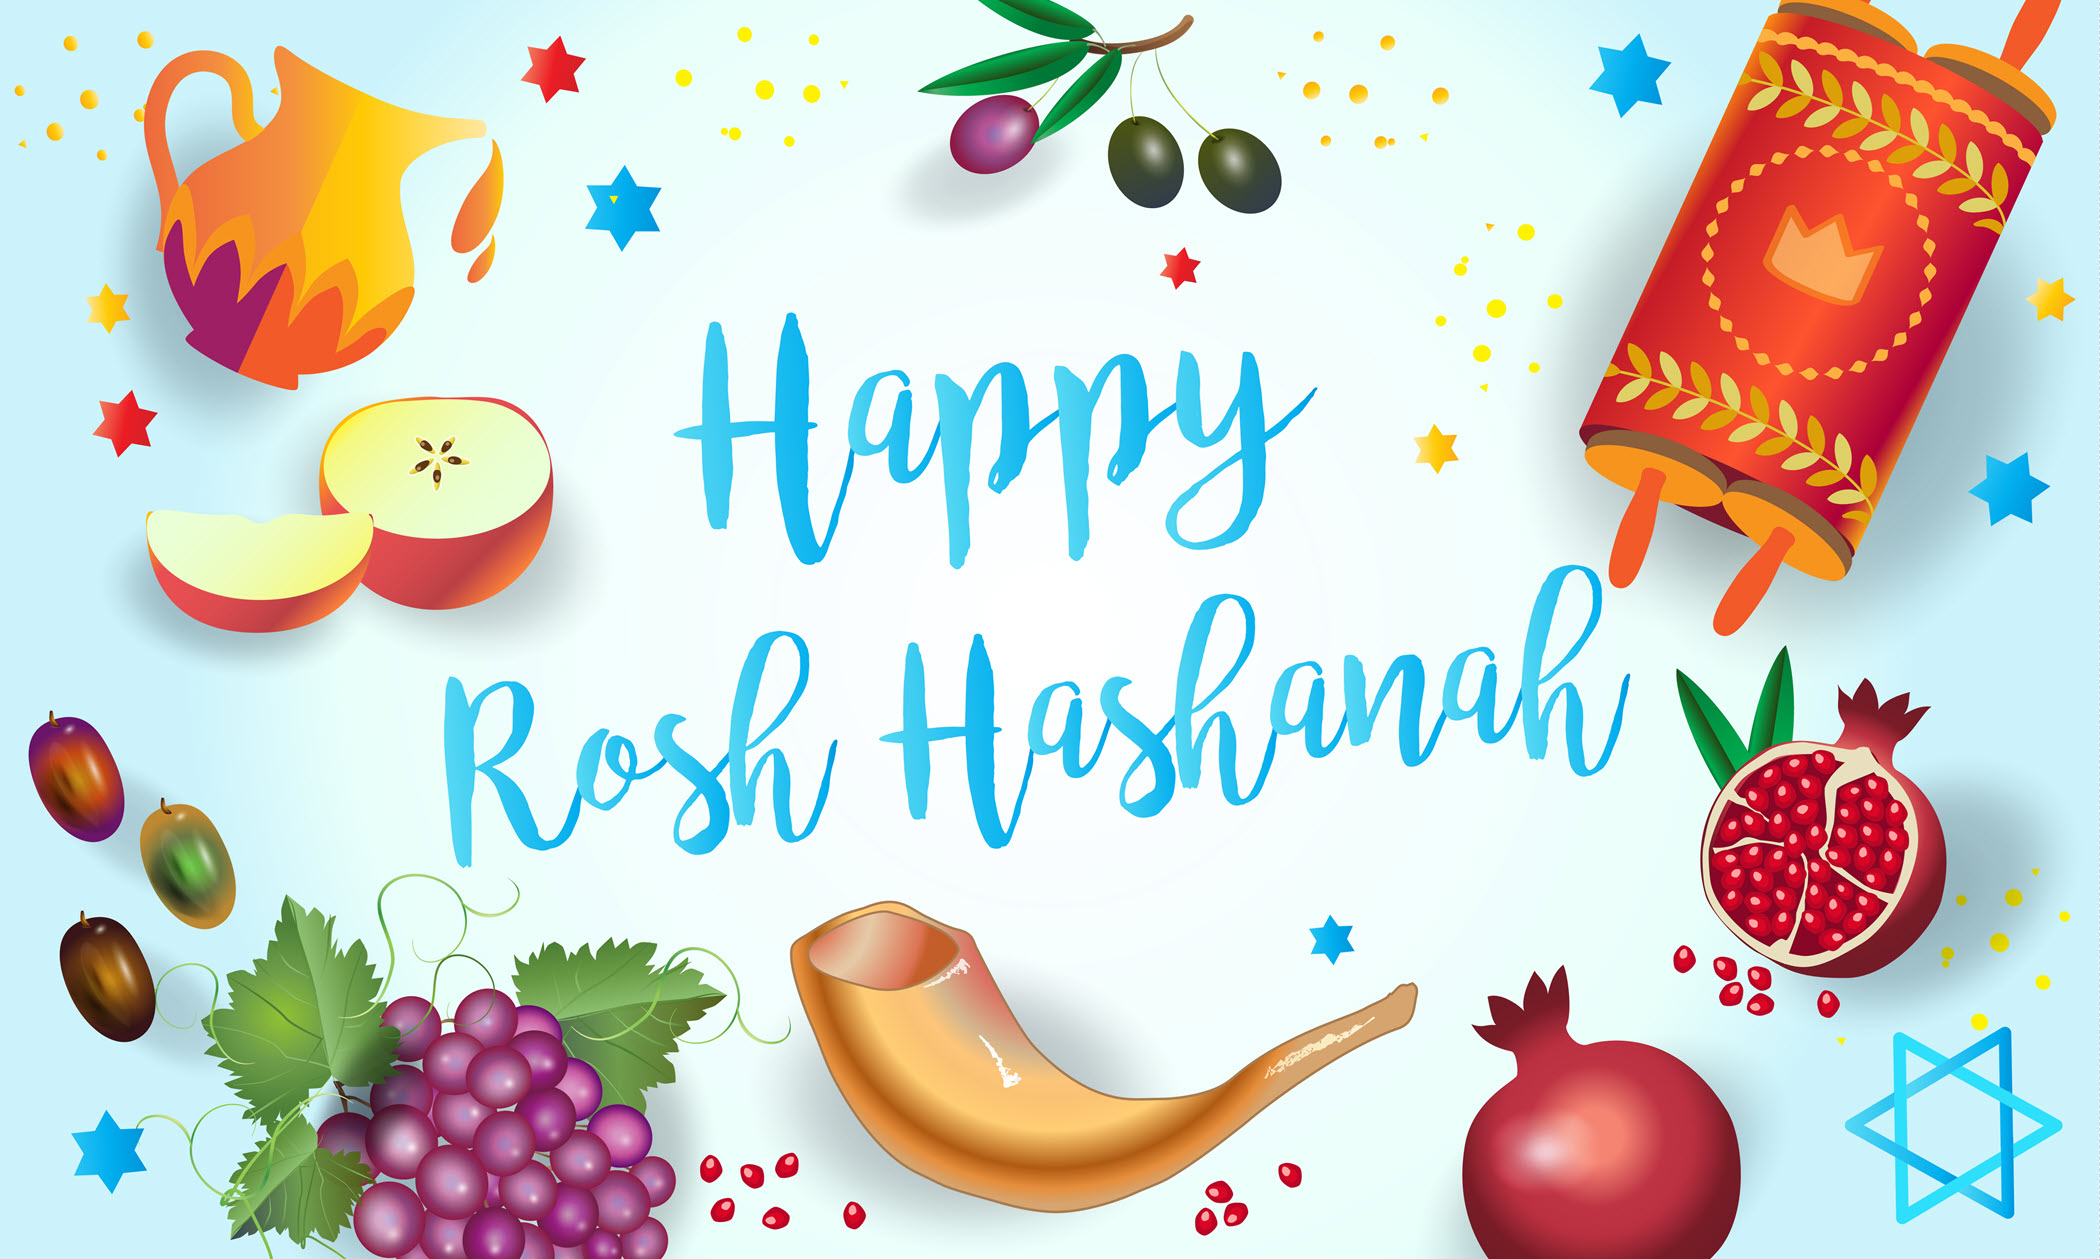 Happy Rosh Hashanah surrounded by images of fruit, honey, a torah scroll, and a shofar